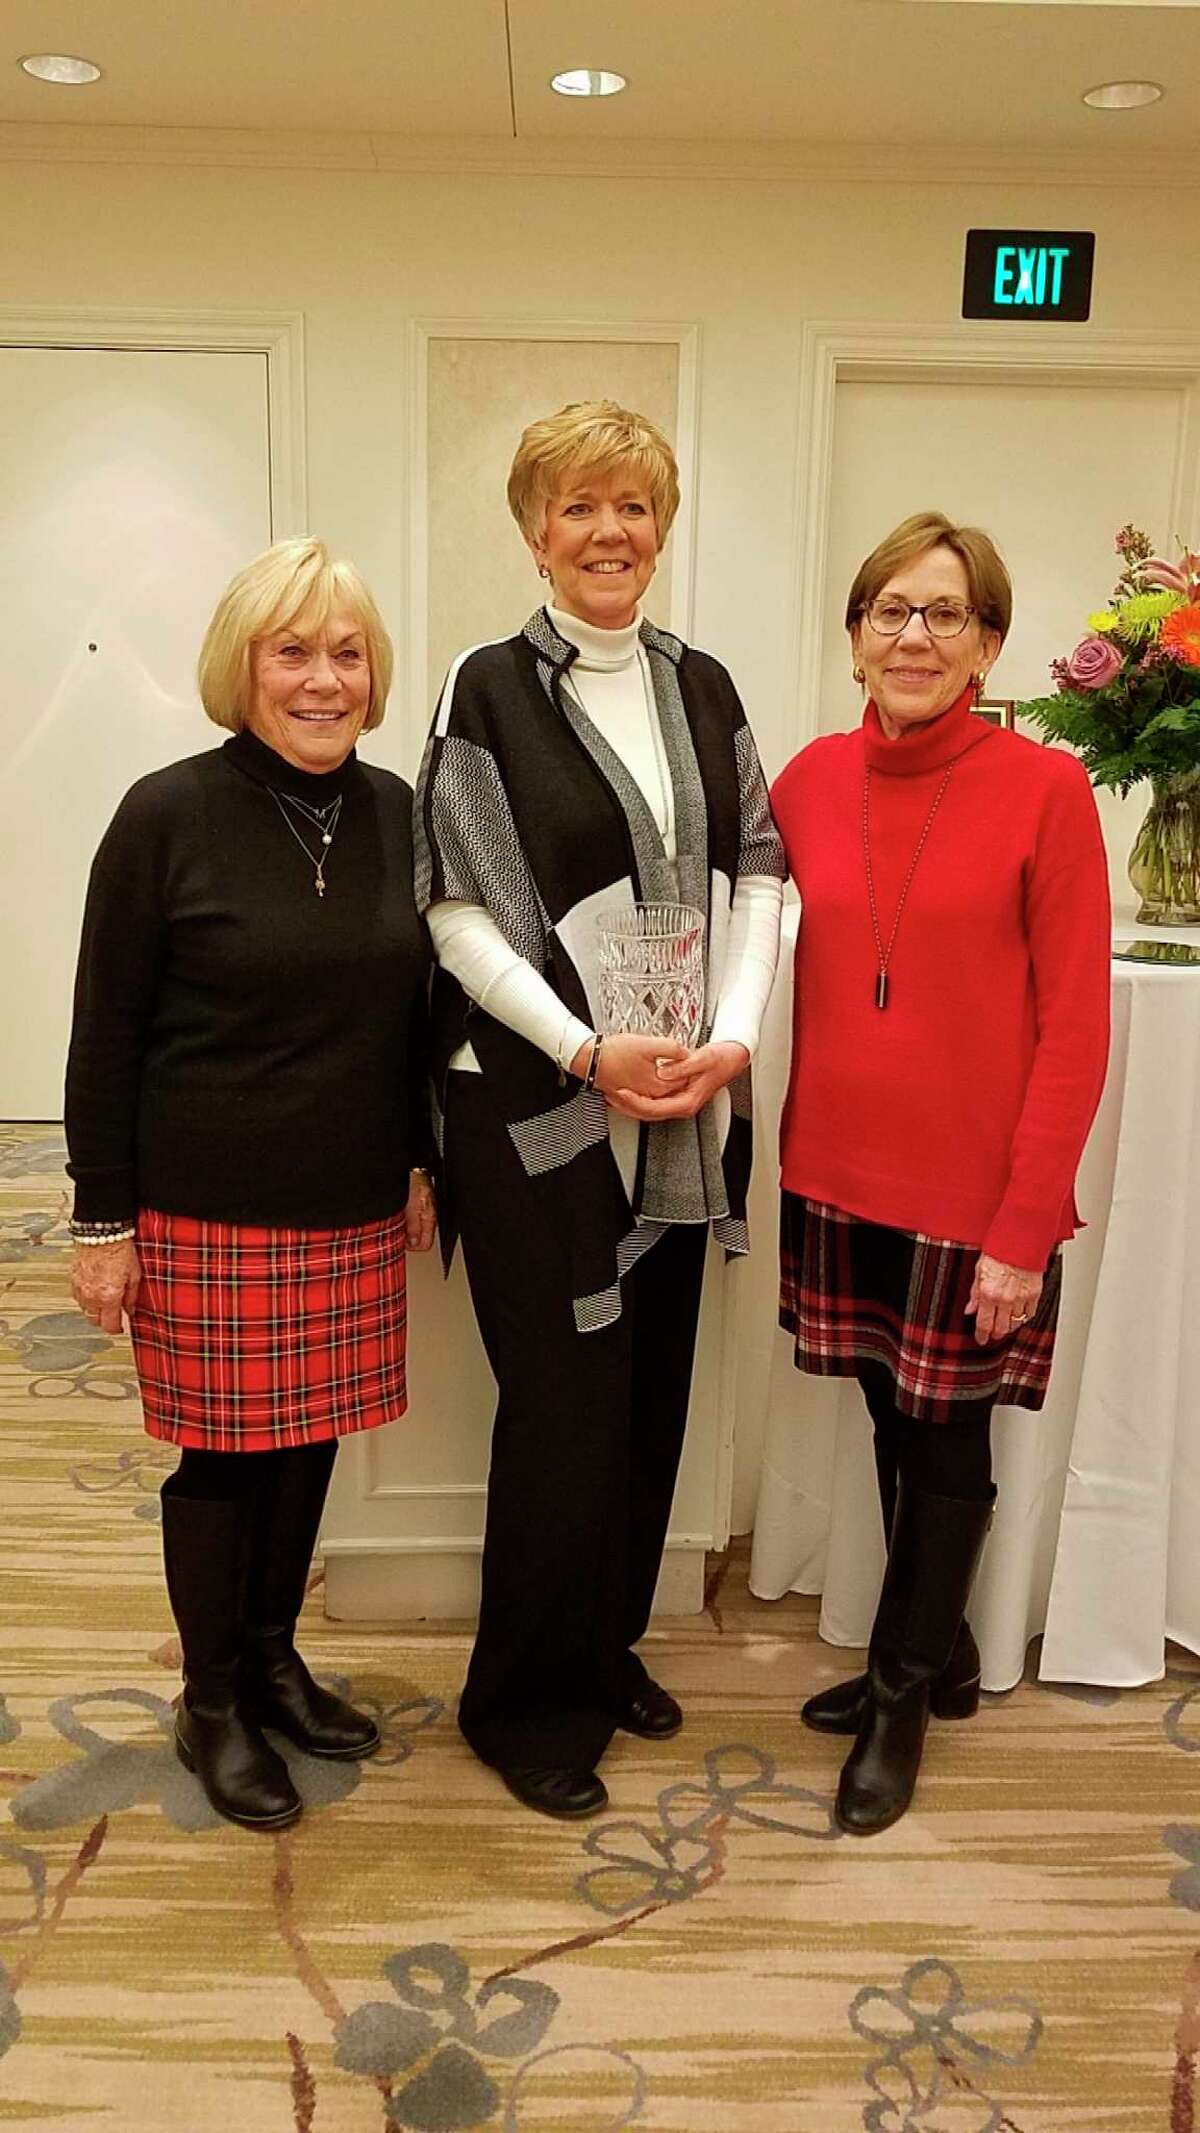 Pictured are, from left, Mary Stutelberg, Jan Yuergens and Maureen Donker. (Photo provided)